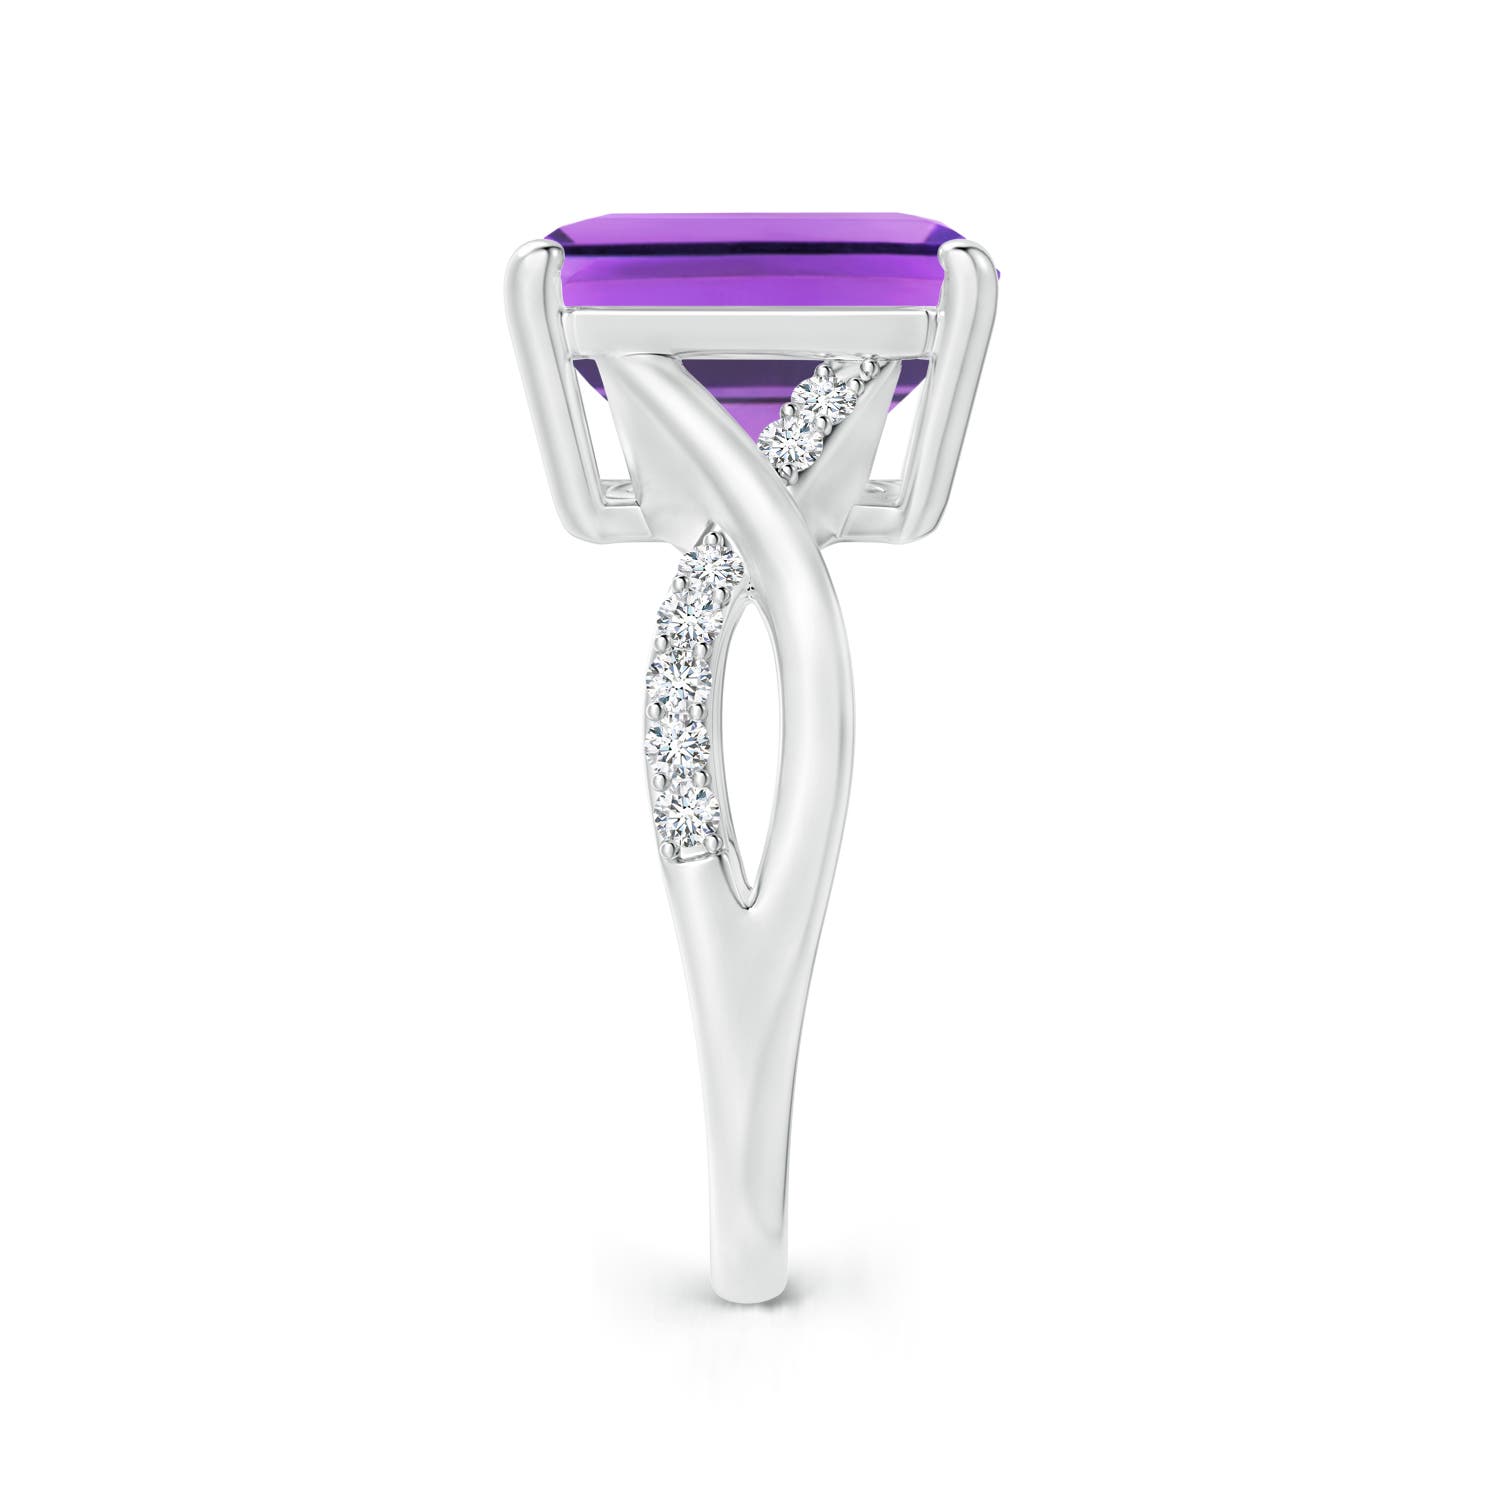 AA - Amethyst / 5.47 CT / 14 KT White Gold